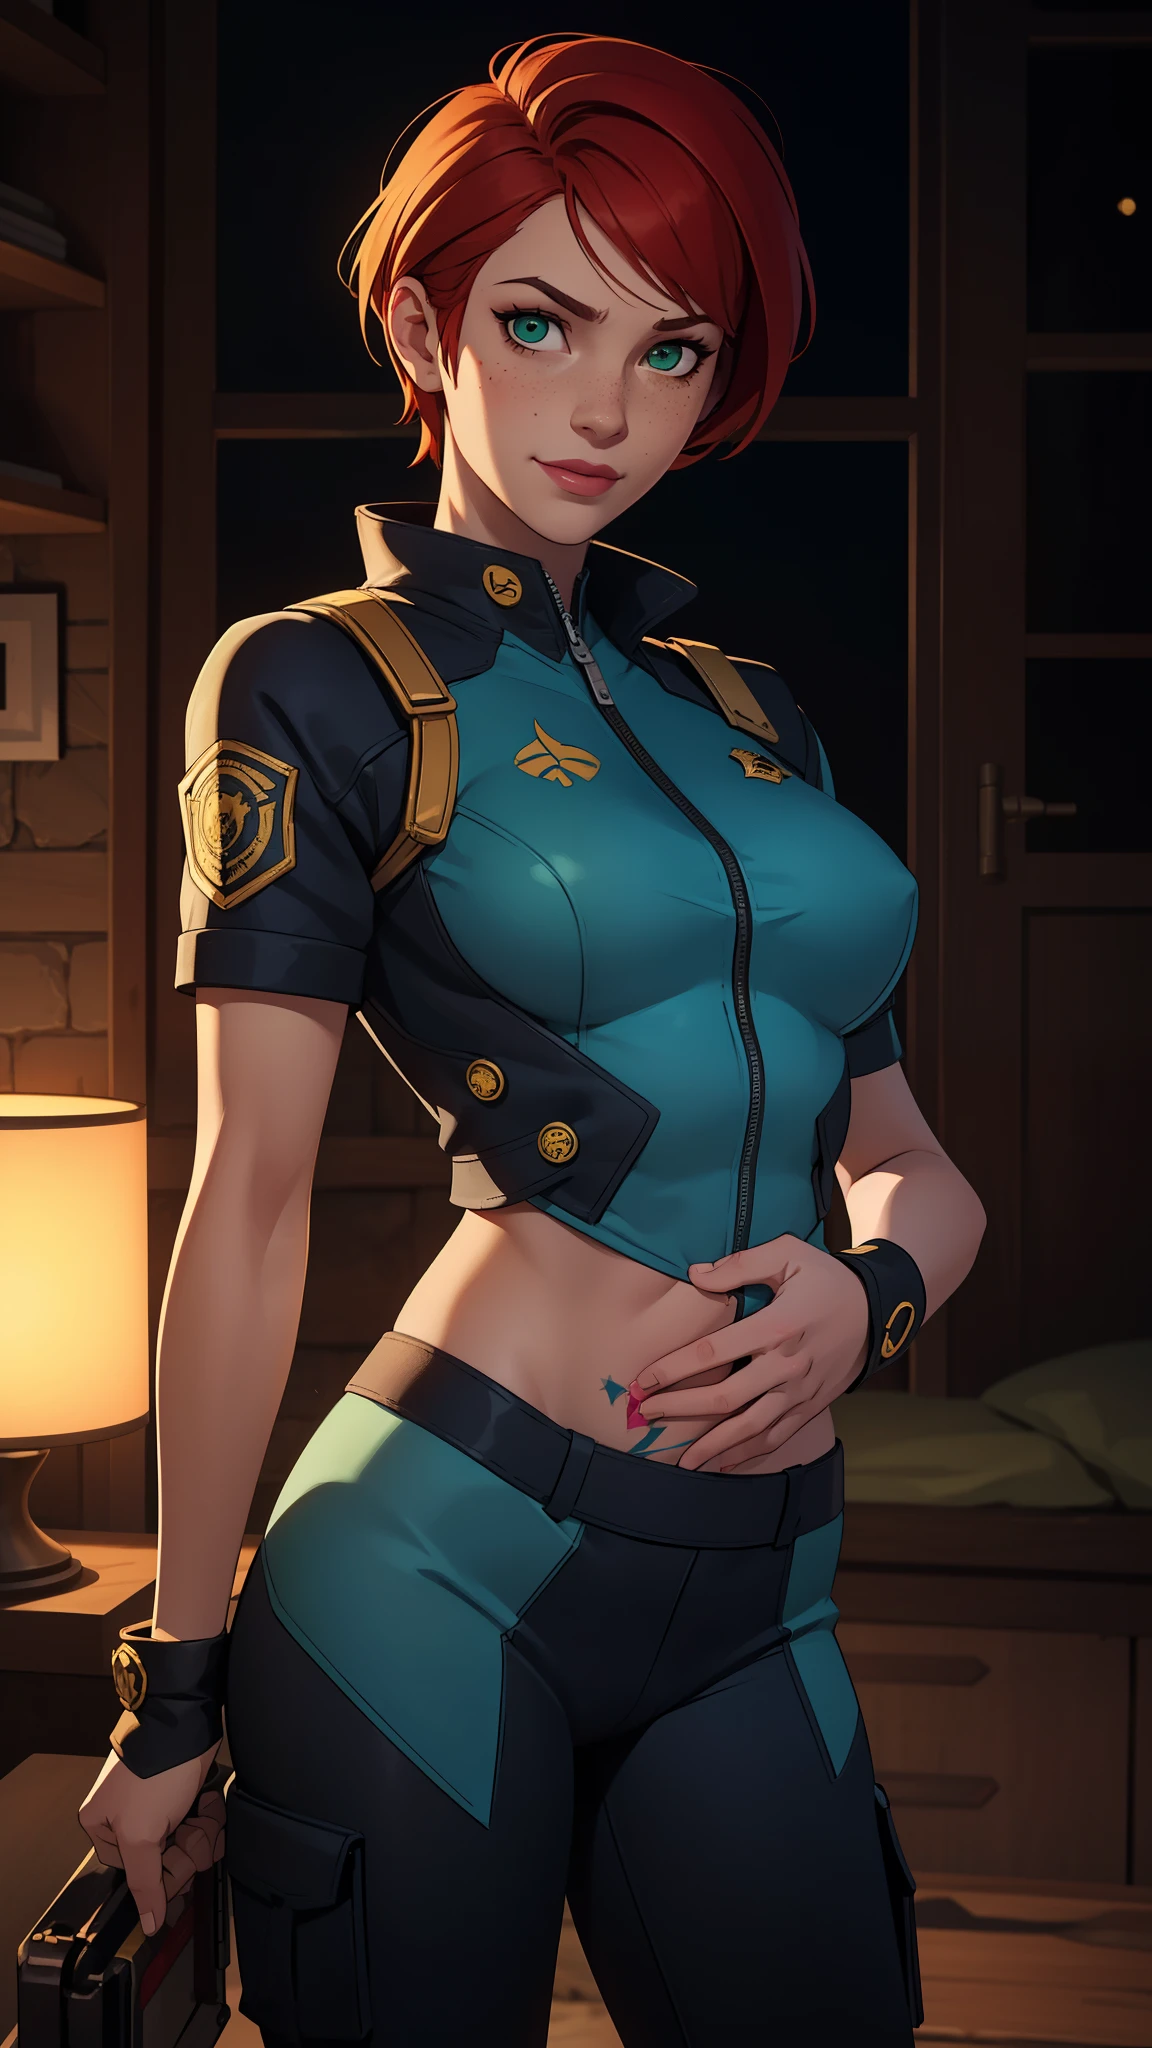 gwen tennyson,1girl,tracer,jill valentine, rebecca chambers,overwatch,resident evil,close up,mecha pilot,body paint, haunted forest,tattoos,blue and gray plugsuit,hair pin,steel short sleeve silk top,steel cargo pants,uncovered belly, short hair,cute makeup,green eyes,red and gold hair,shy smile,freckles, redhead,beautiful girl,large breasts, ultra detailed,realistic,fantasy art, military uniform,steel armor,haunted lab,moonlight,police uniform,pilot jacket,